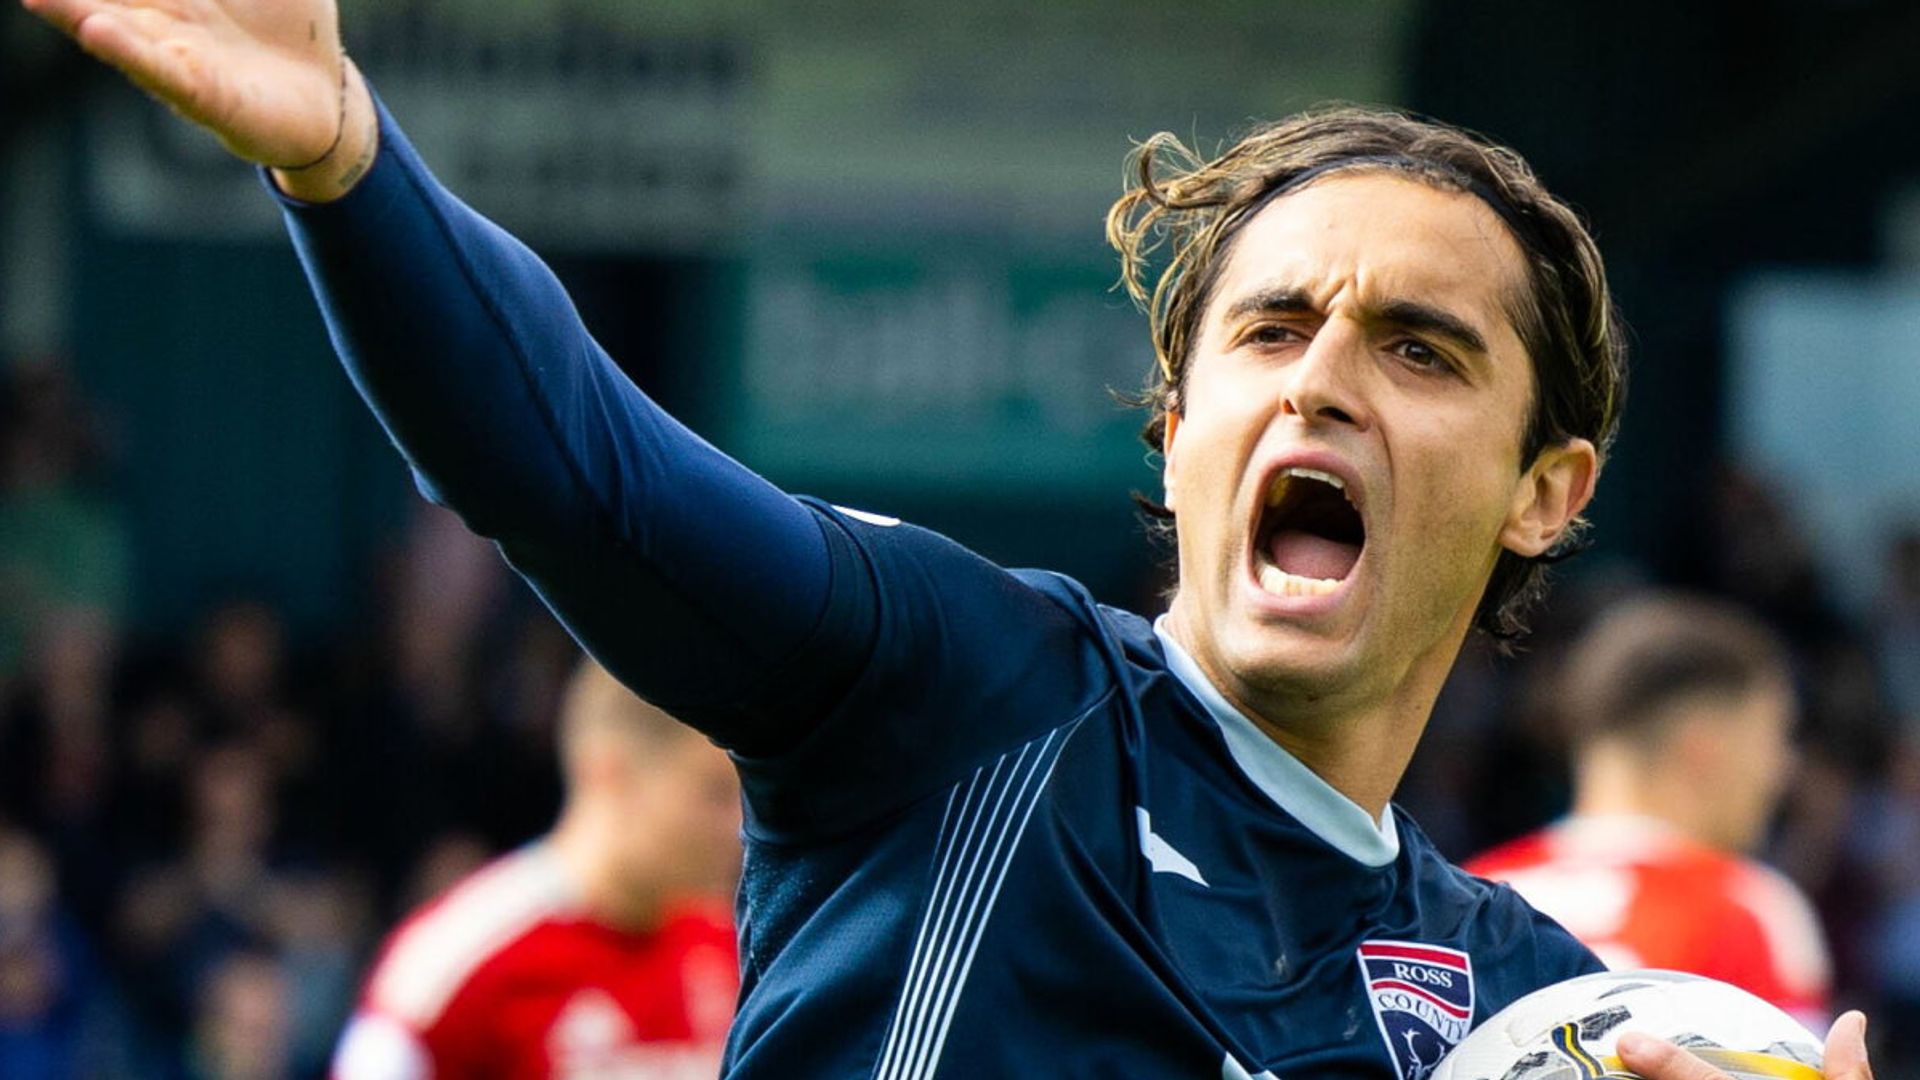 Ross County face relegation play-off after draw with Aberdeen